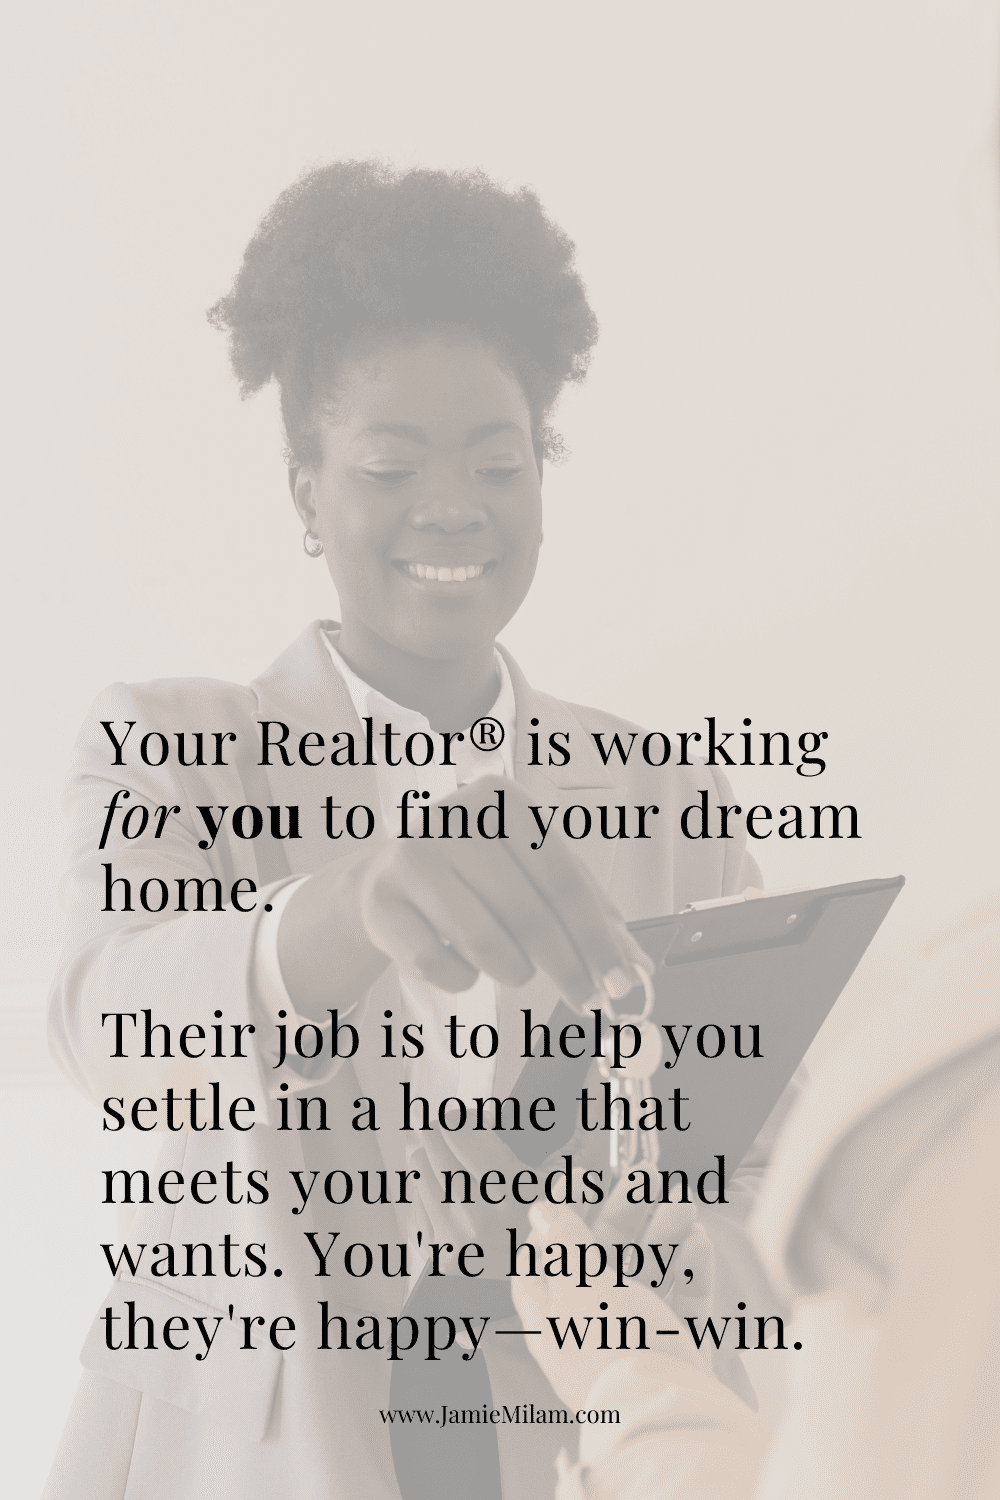 Image of woman handing over keys with overlaid text that says "your Realtor® is working for you to find your dream home. Their job is to help you settle in a home that meets your needs and wants. You're happy, they're happy—win-win. "